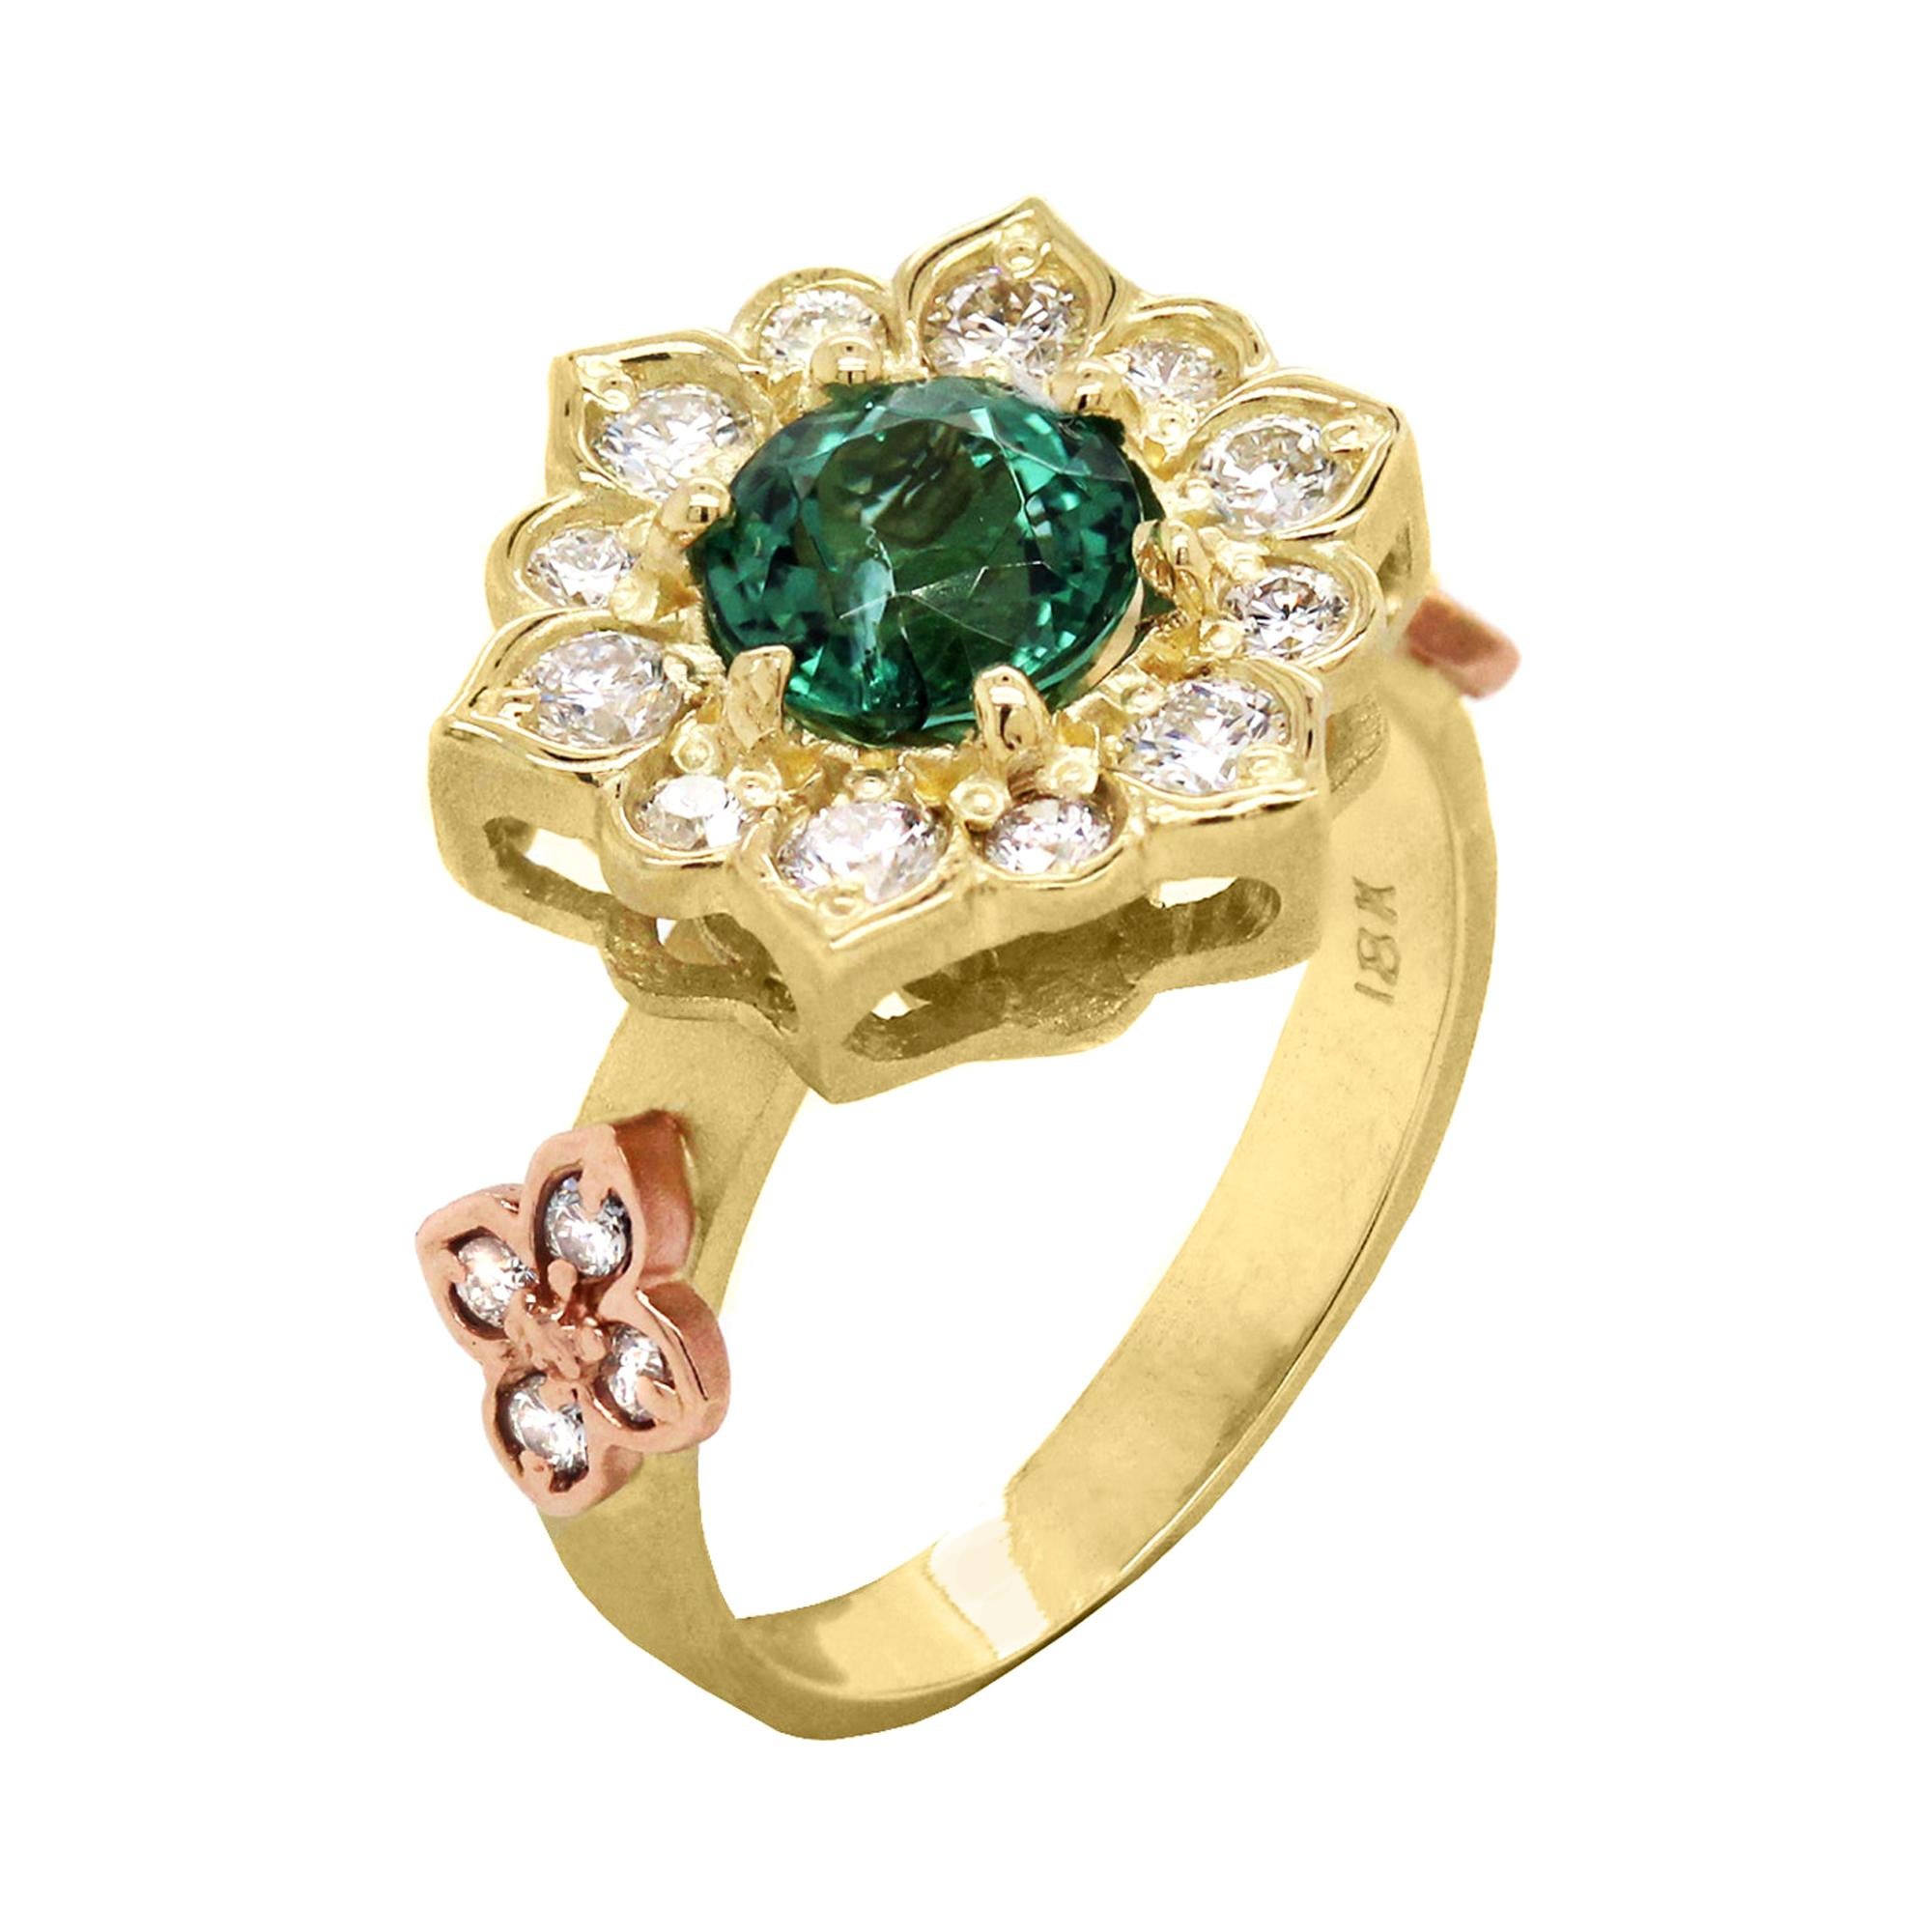 Stambolian Two-Tone Gold and Diamond Ring with Mint Green Tourmaline Center